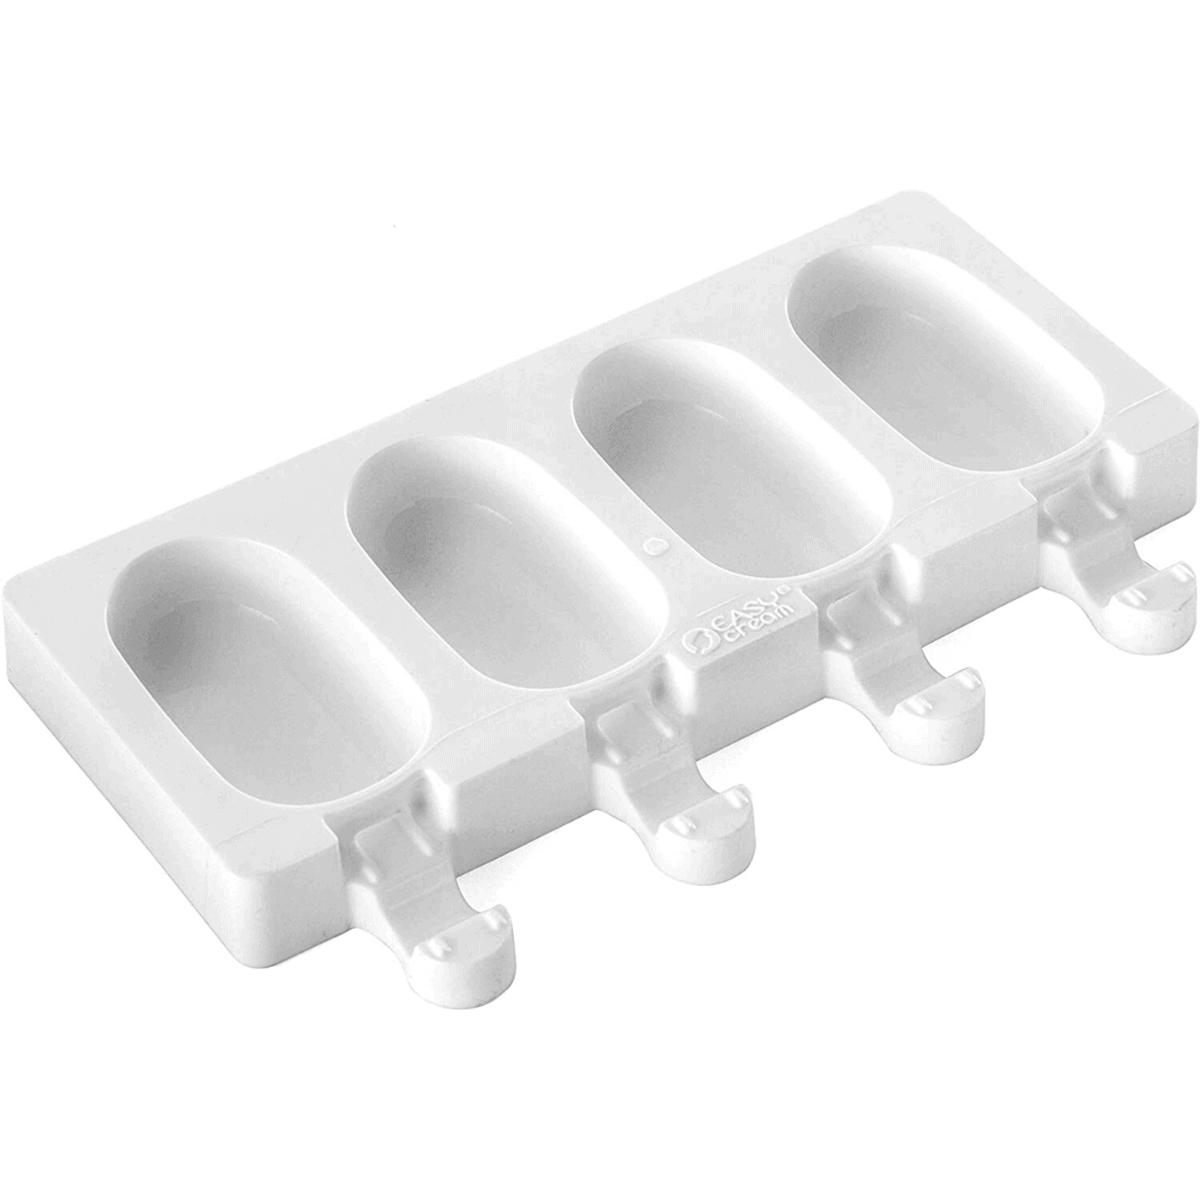 Product - Ice Lollies Mold